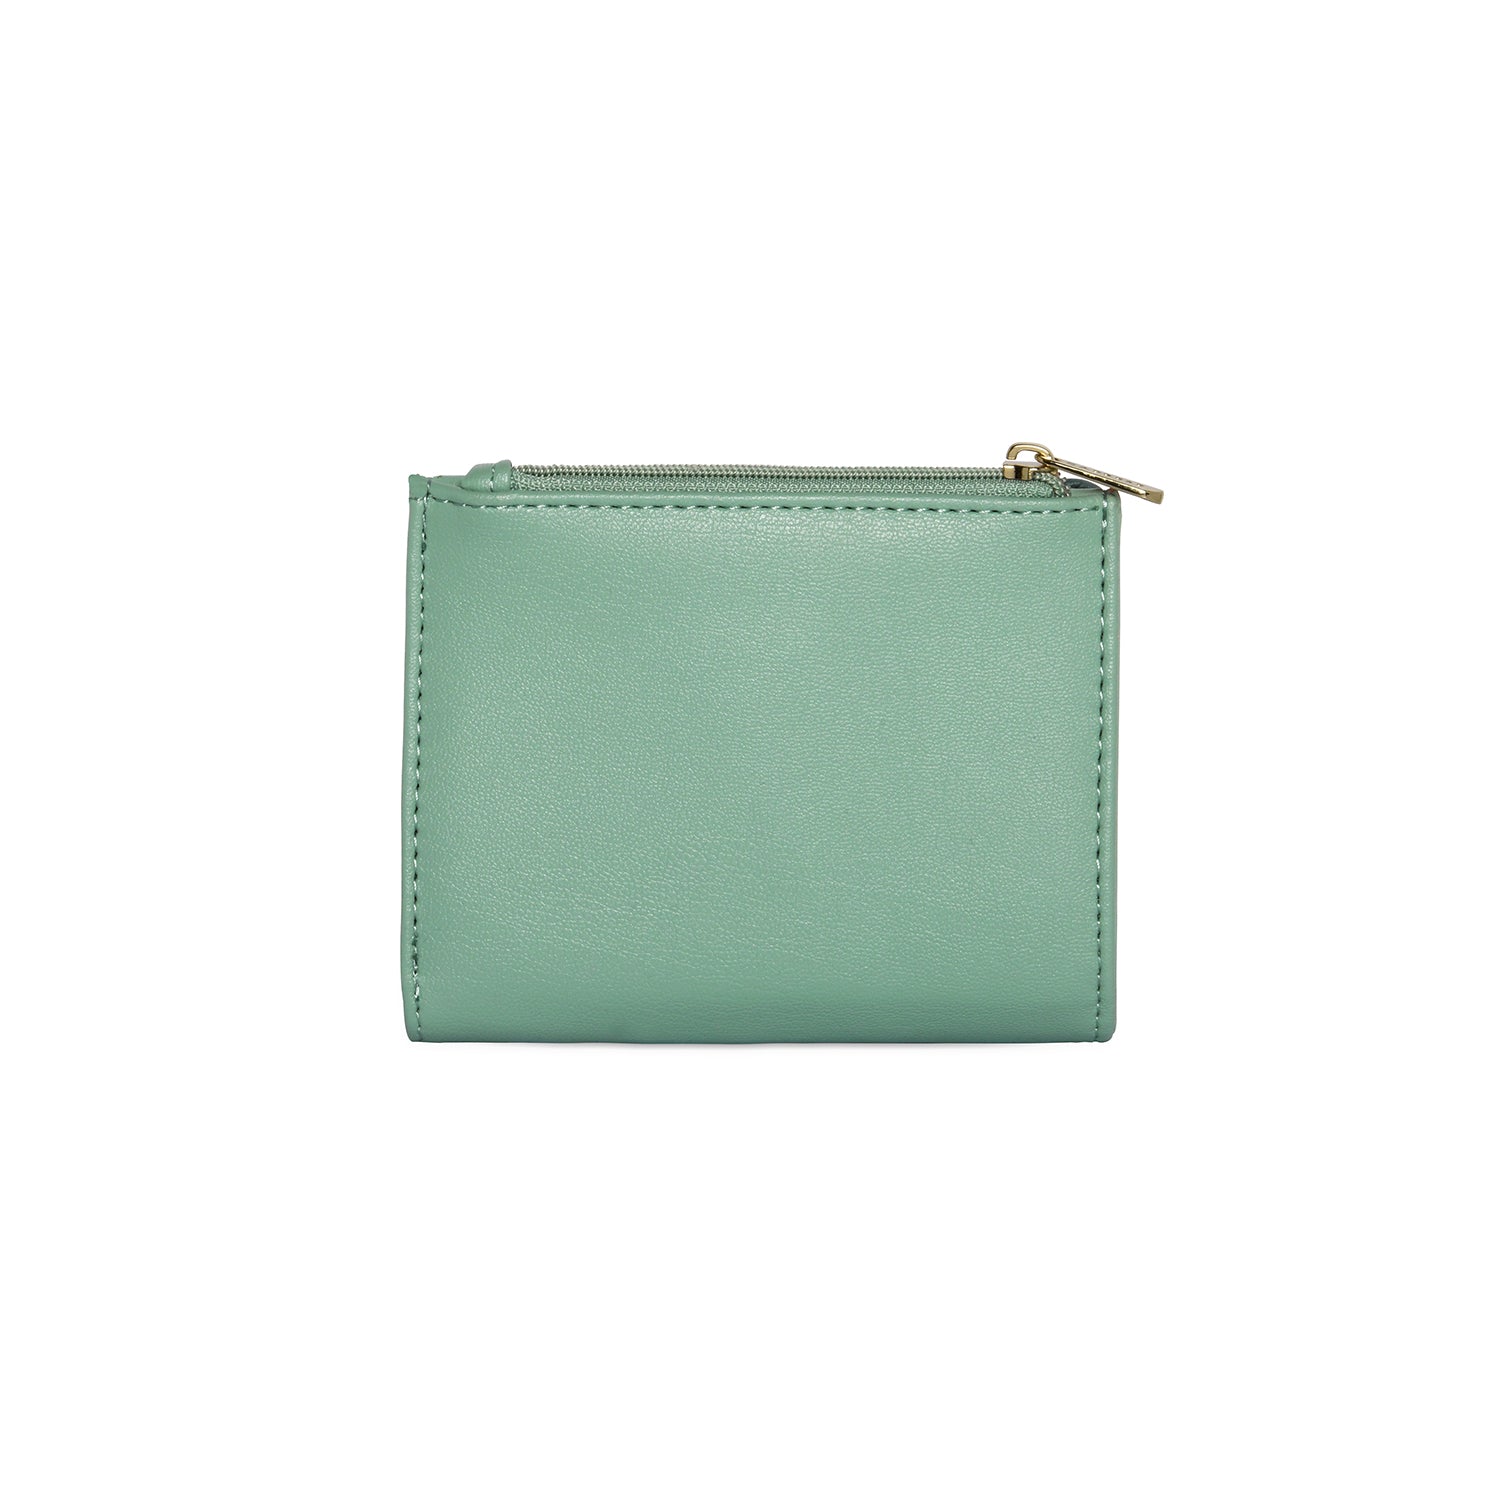 Caprese Erica Fold Wallet Small LIME / Small